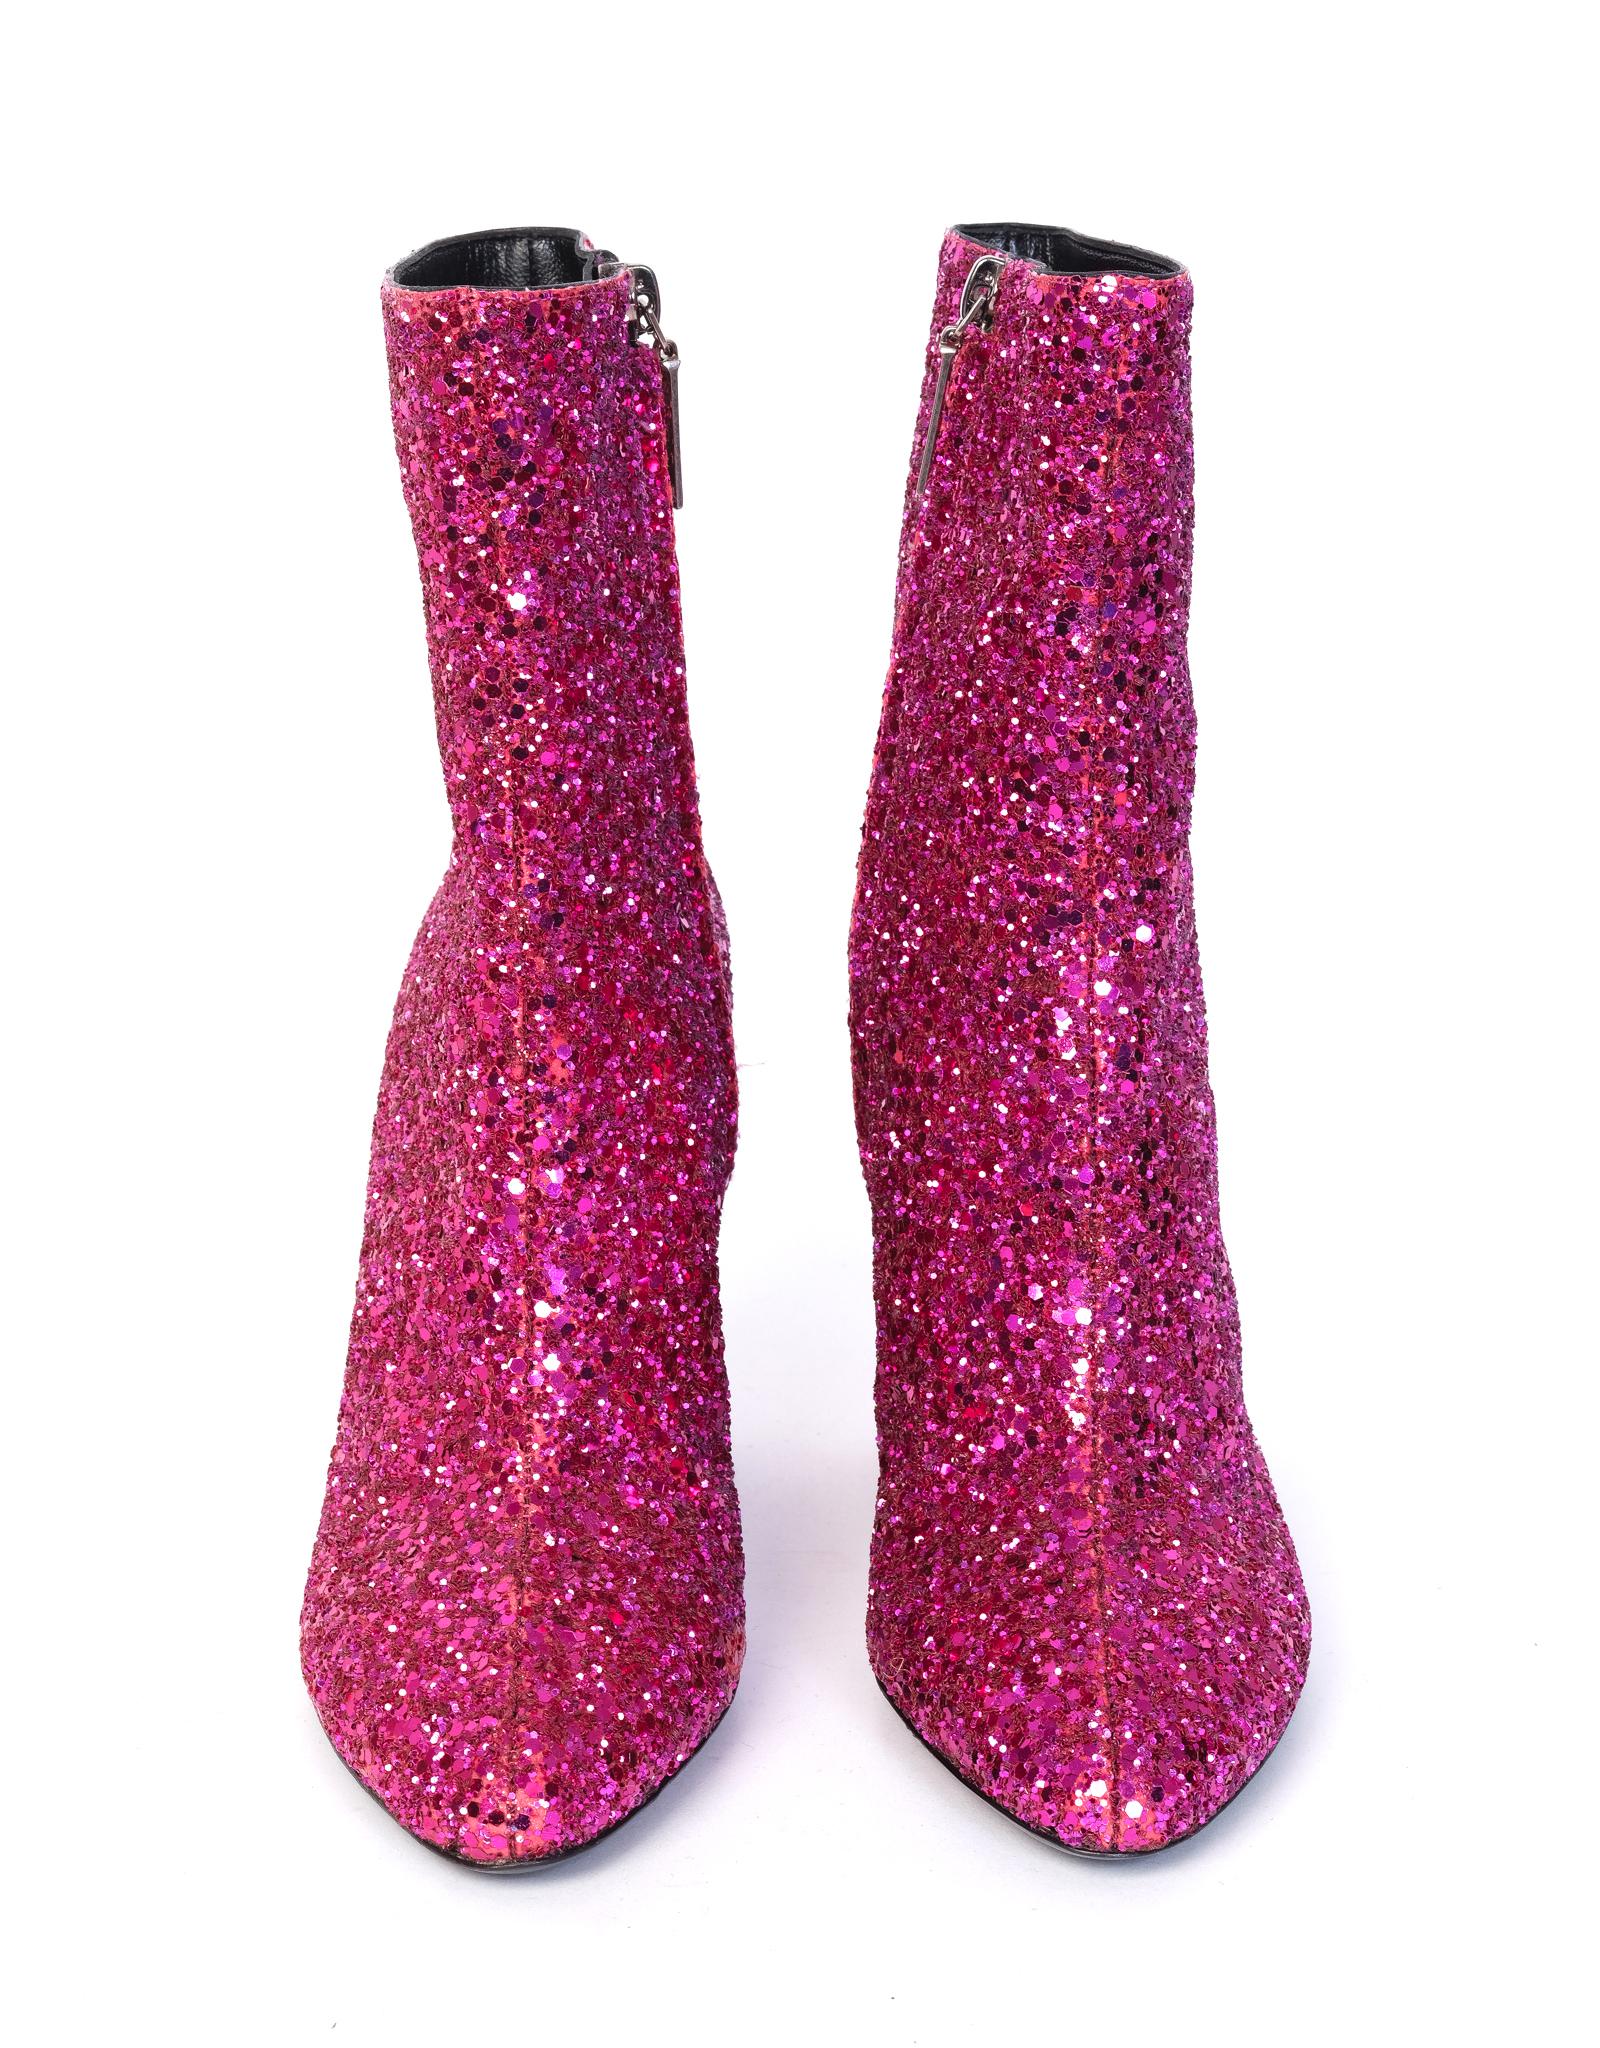 Featuring a pink glitter exterior, a leather black leather interior, side zippers, a heel height of 3.75 inches, and black soles.

COLOR: Pink
ITEM CODE: CA 539210
MATERIAL: Leather & glitter
SIZE: 36 EU / 5.5 US
HEEL HEIGHT: 95 mm (3.75